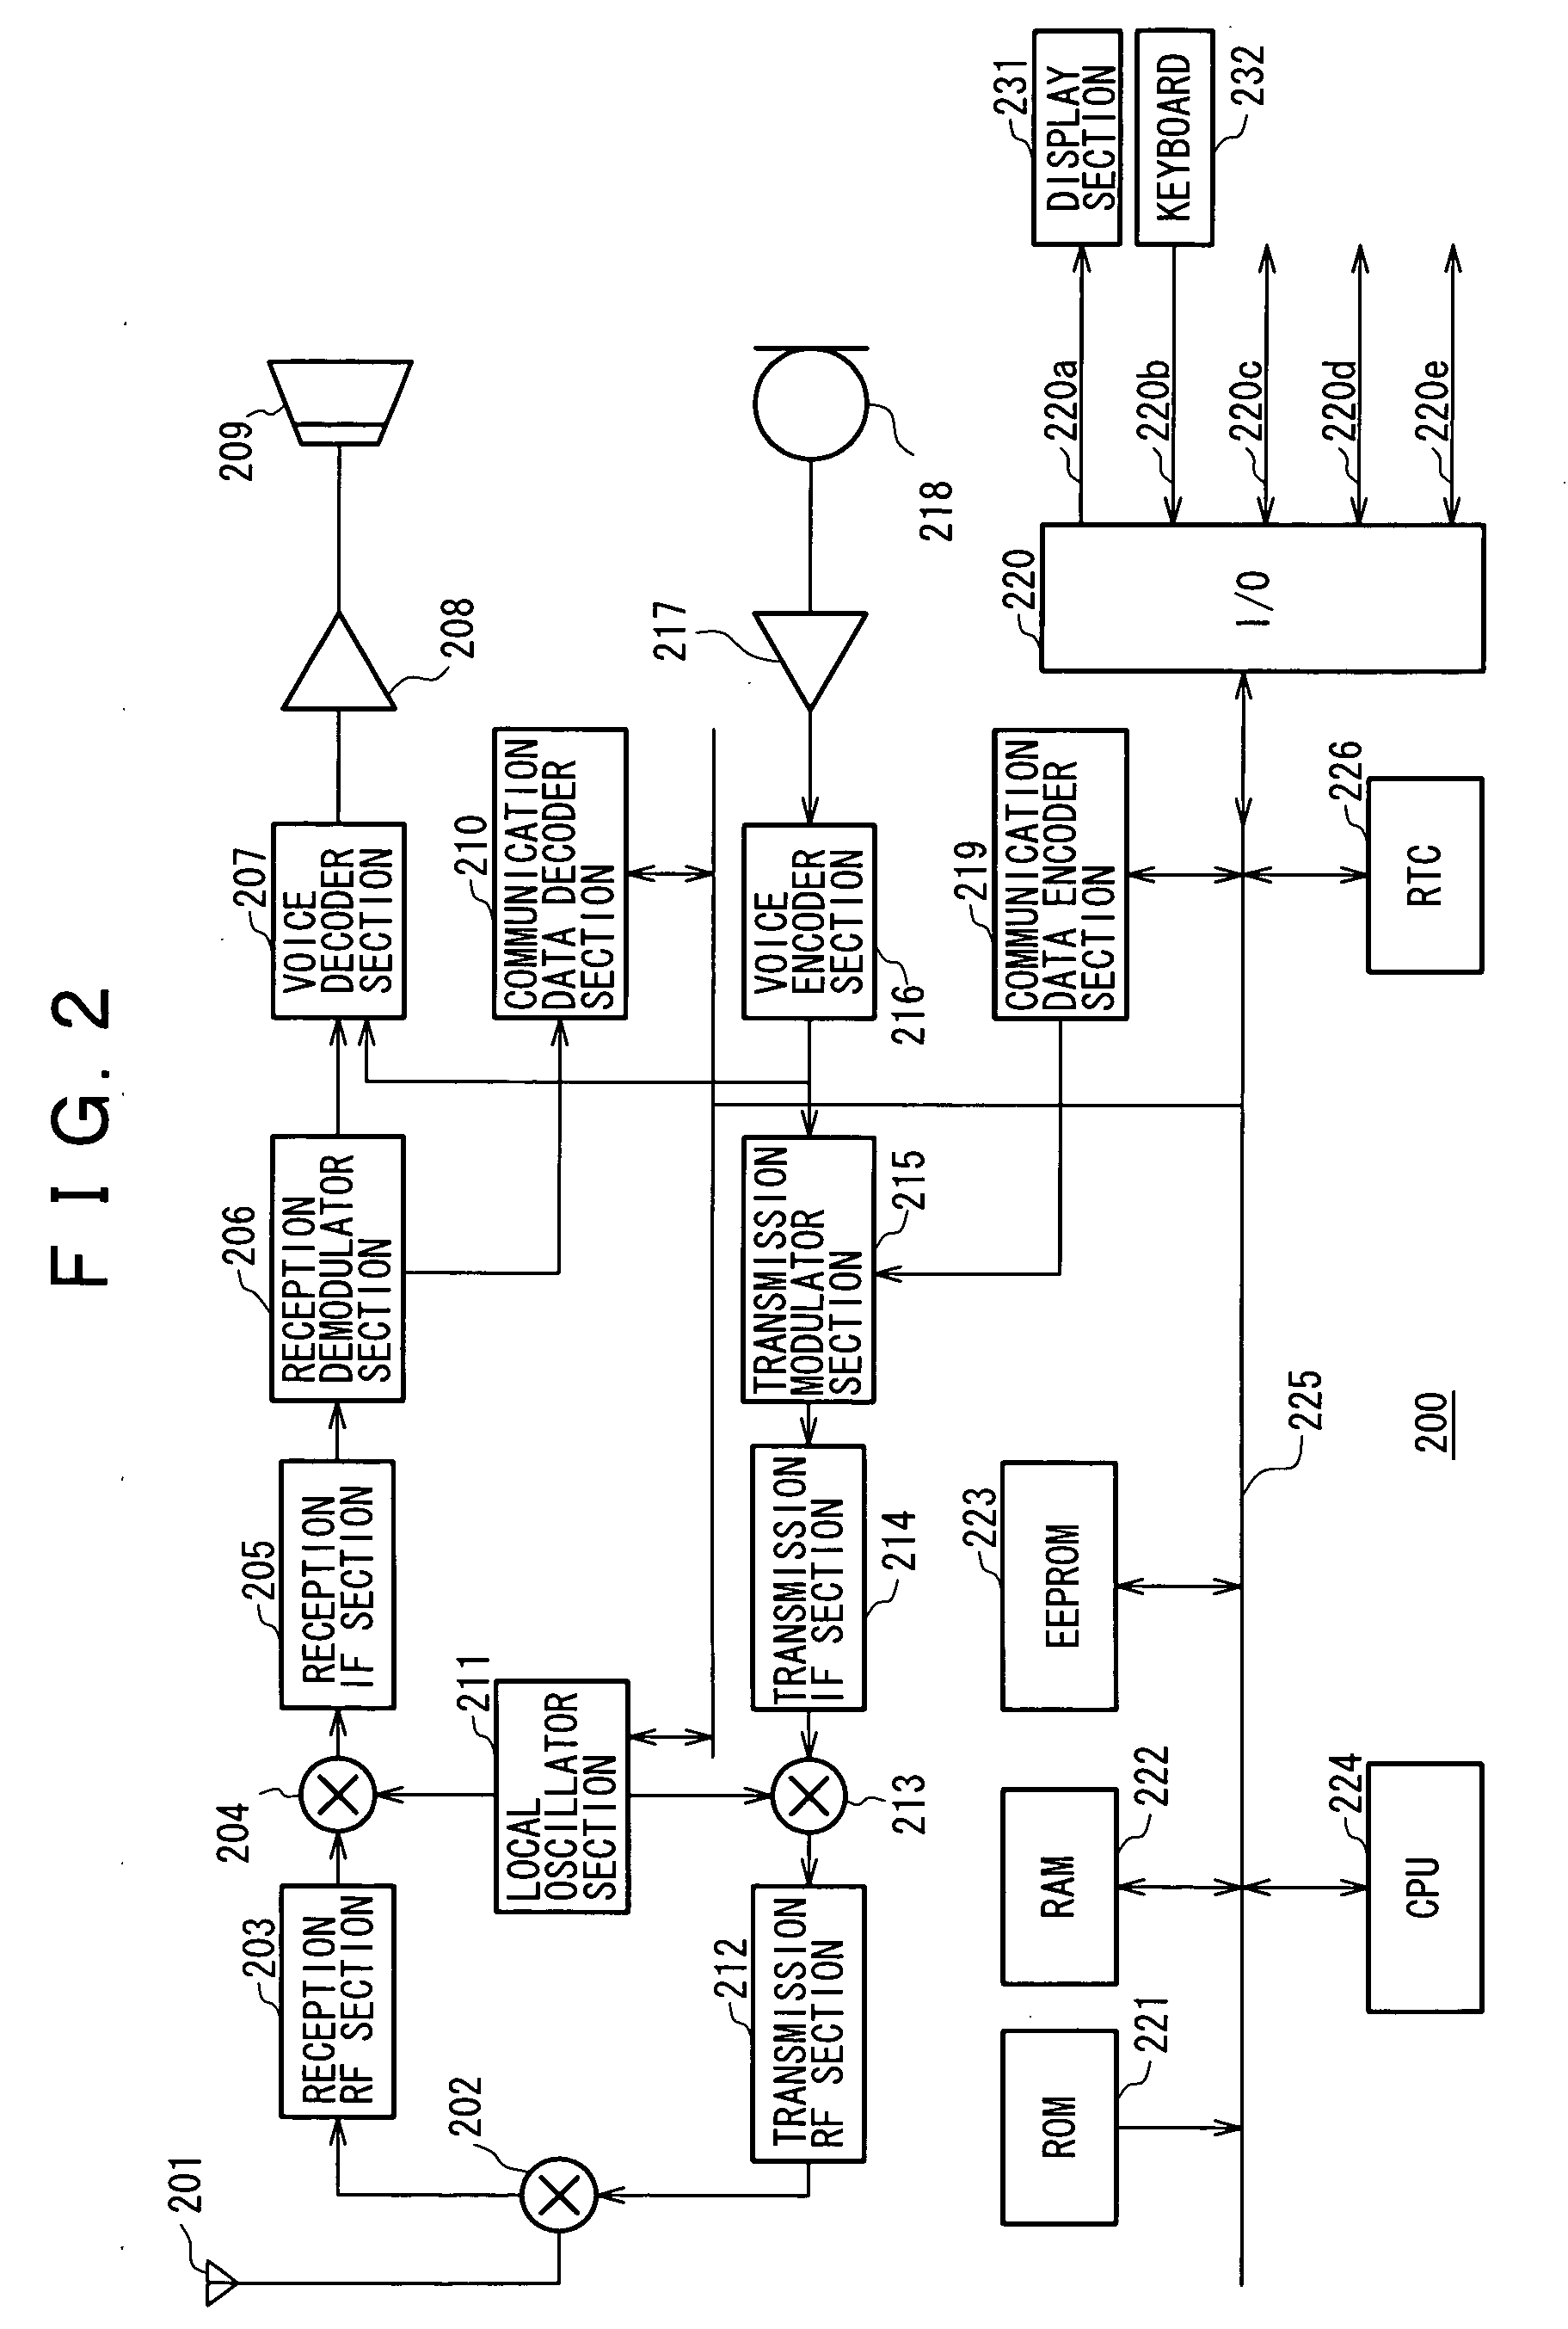 Subscriber identity module and method of preventing access thereto, and mobile communication terminal device